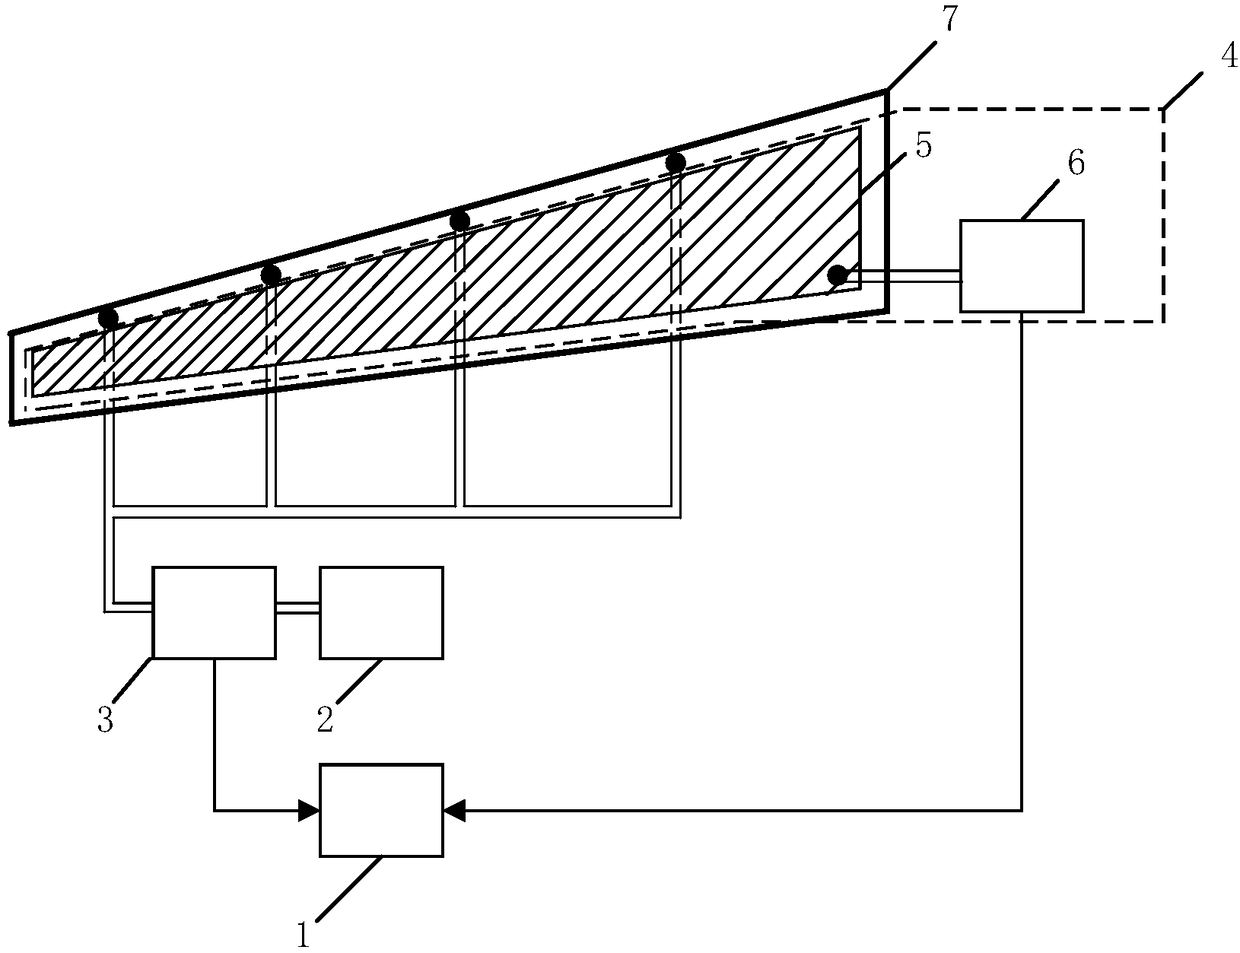 Compound deicing fluid and gasbag anti-icing system